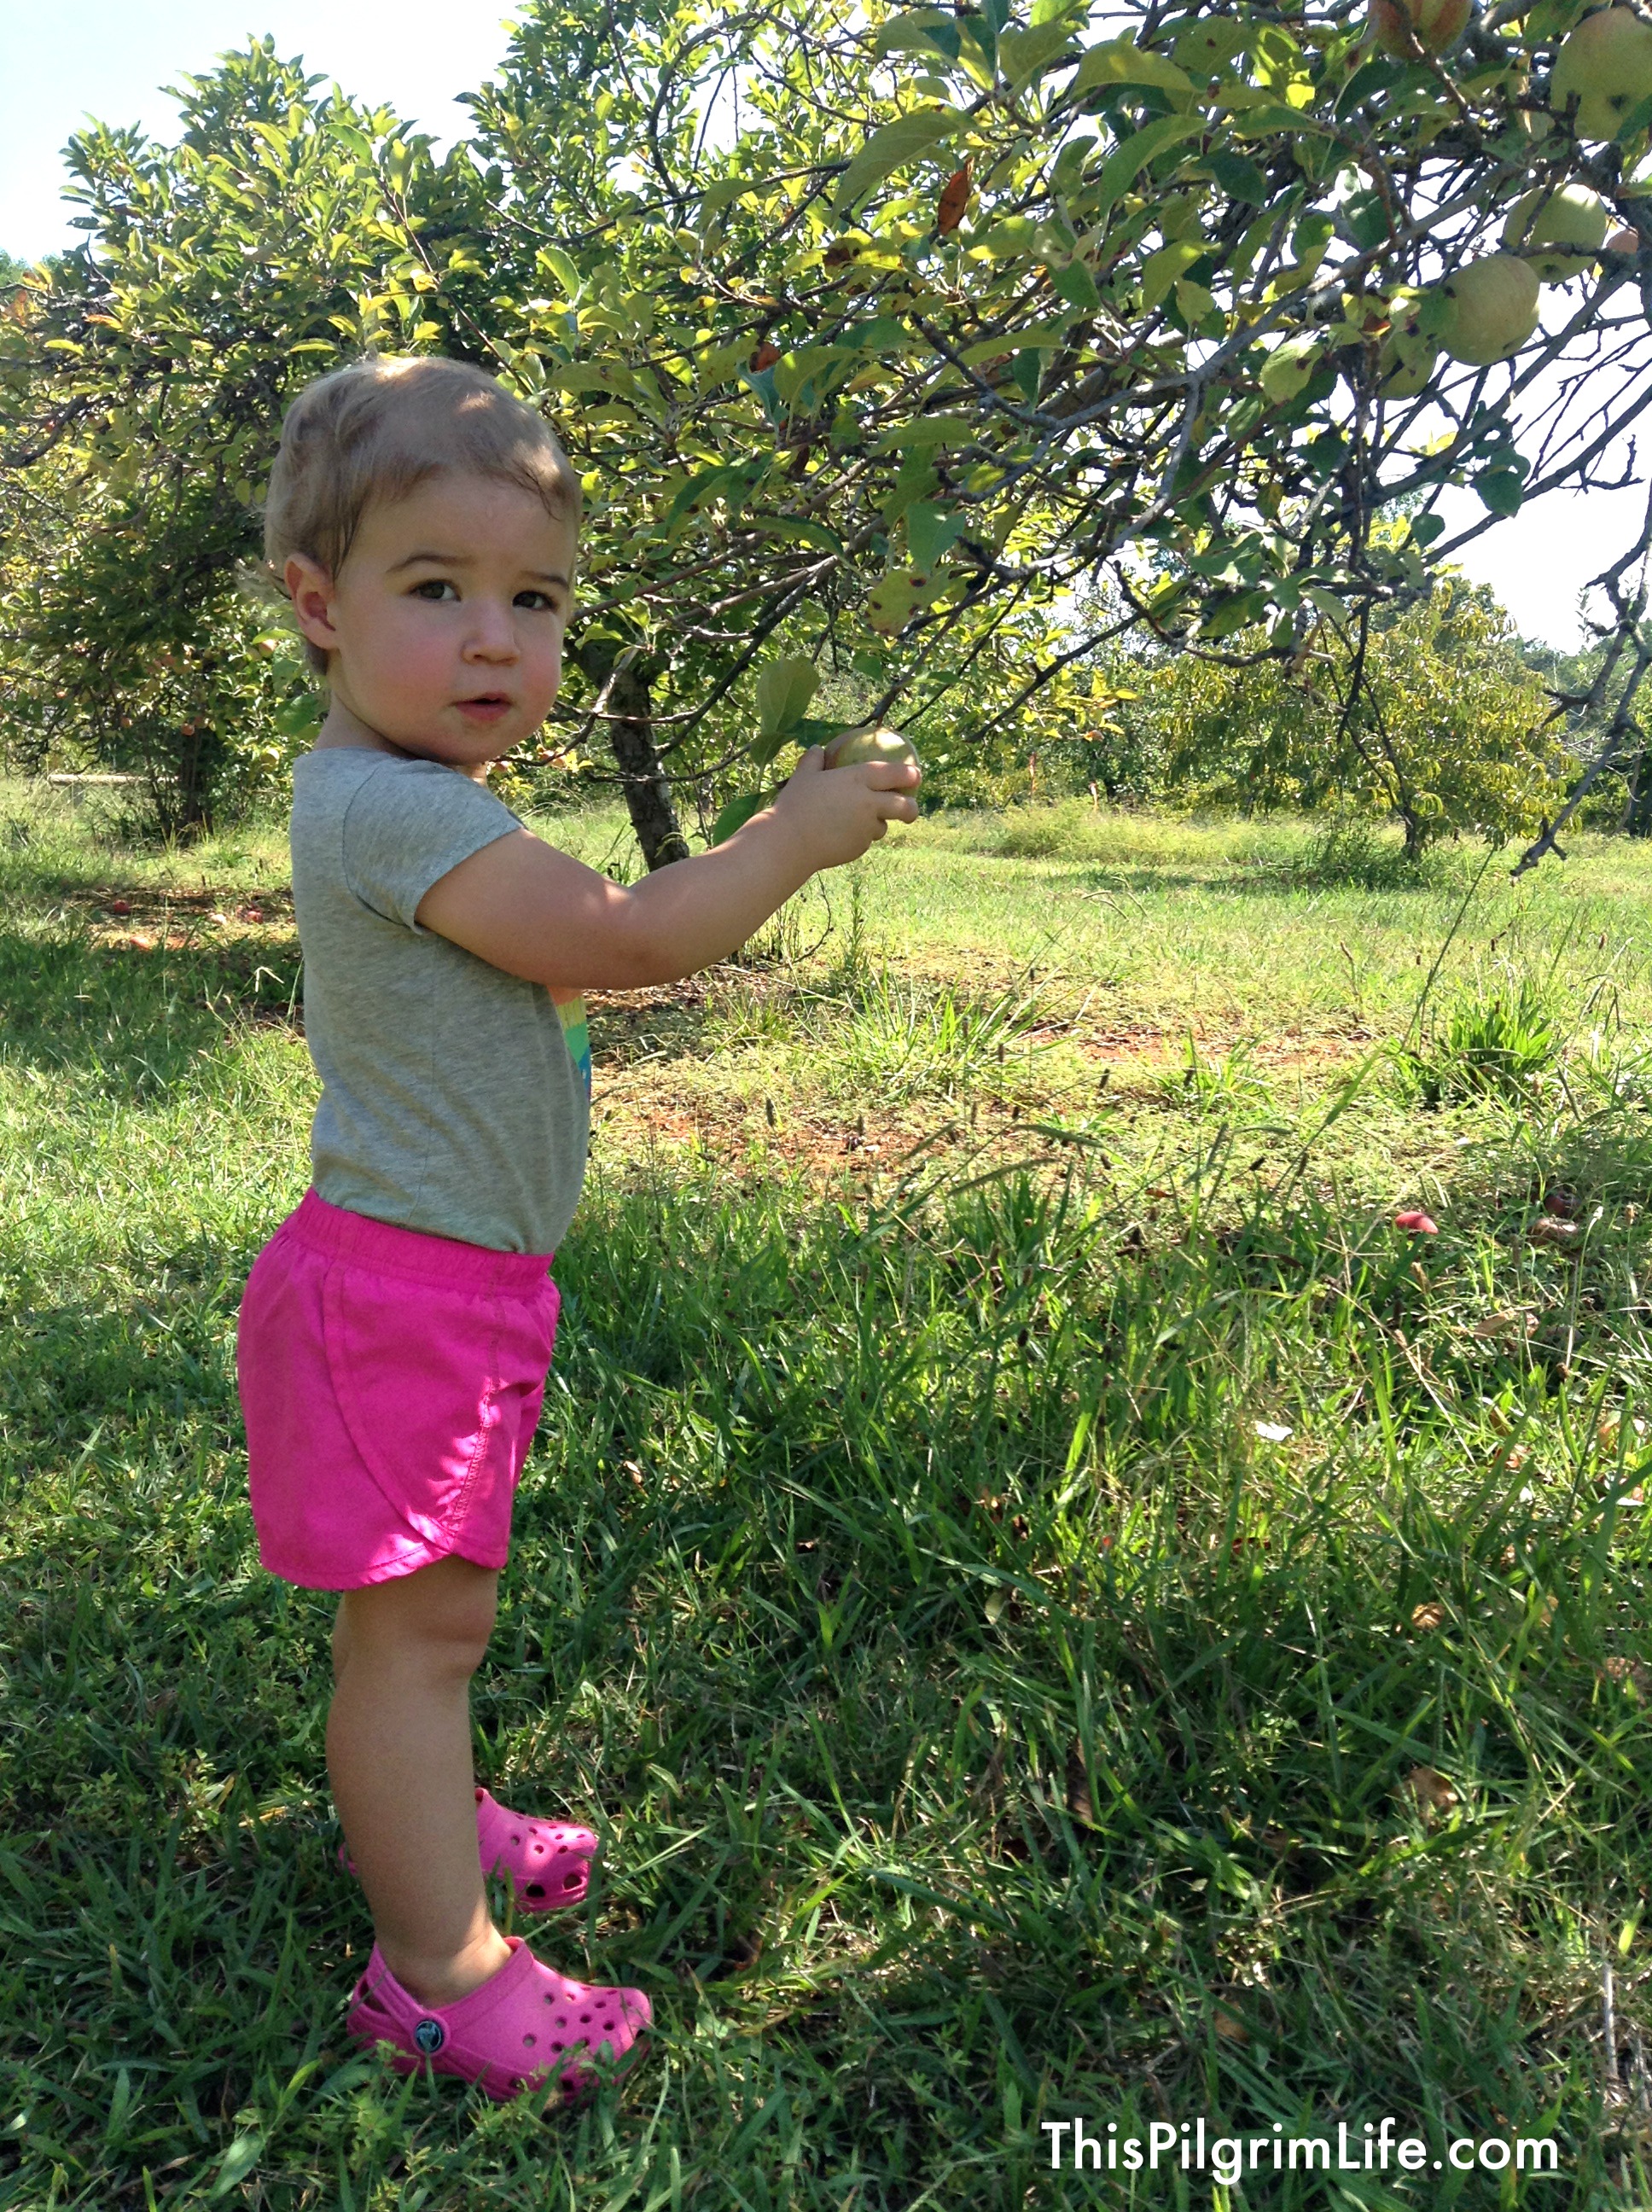 "Kids in the Kitchen" extends to apple orchards too!